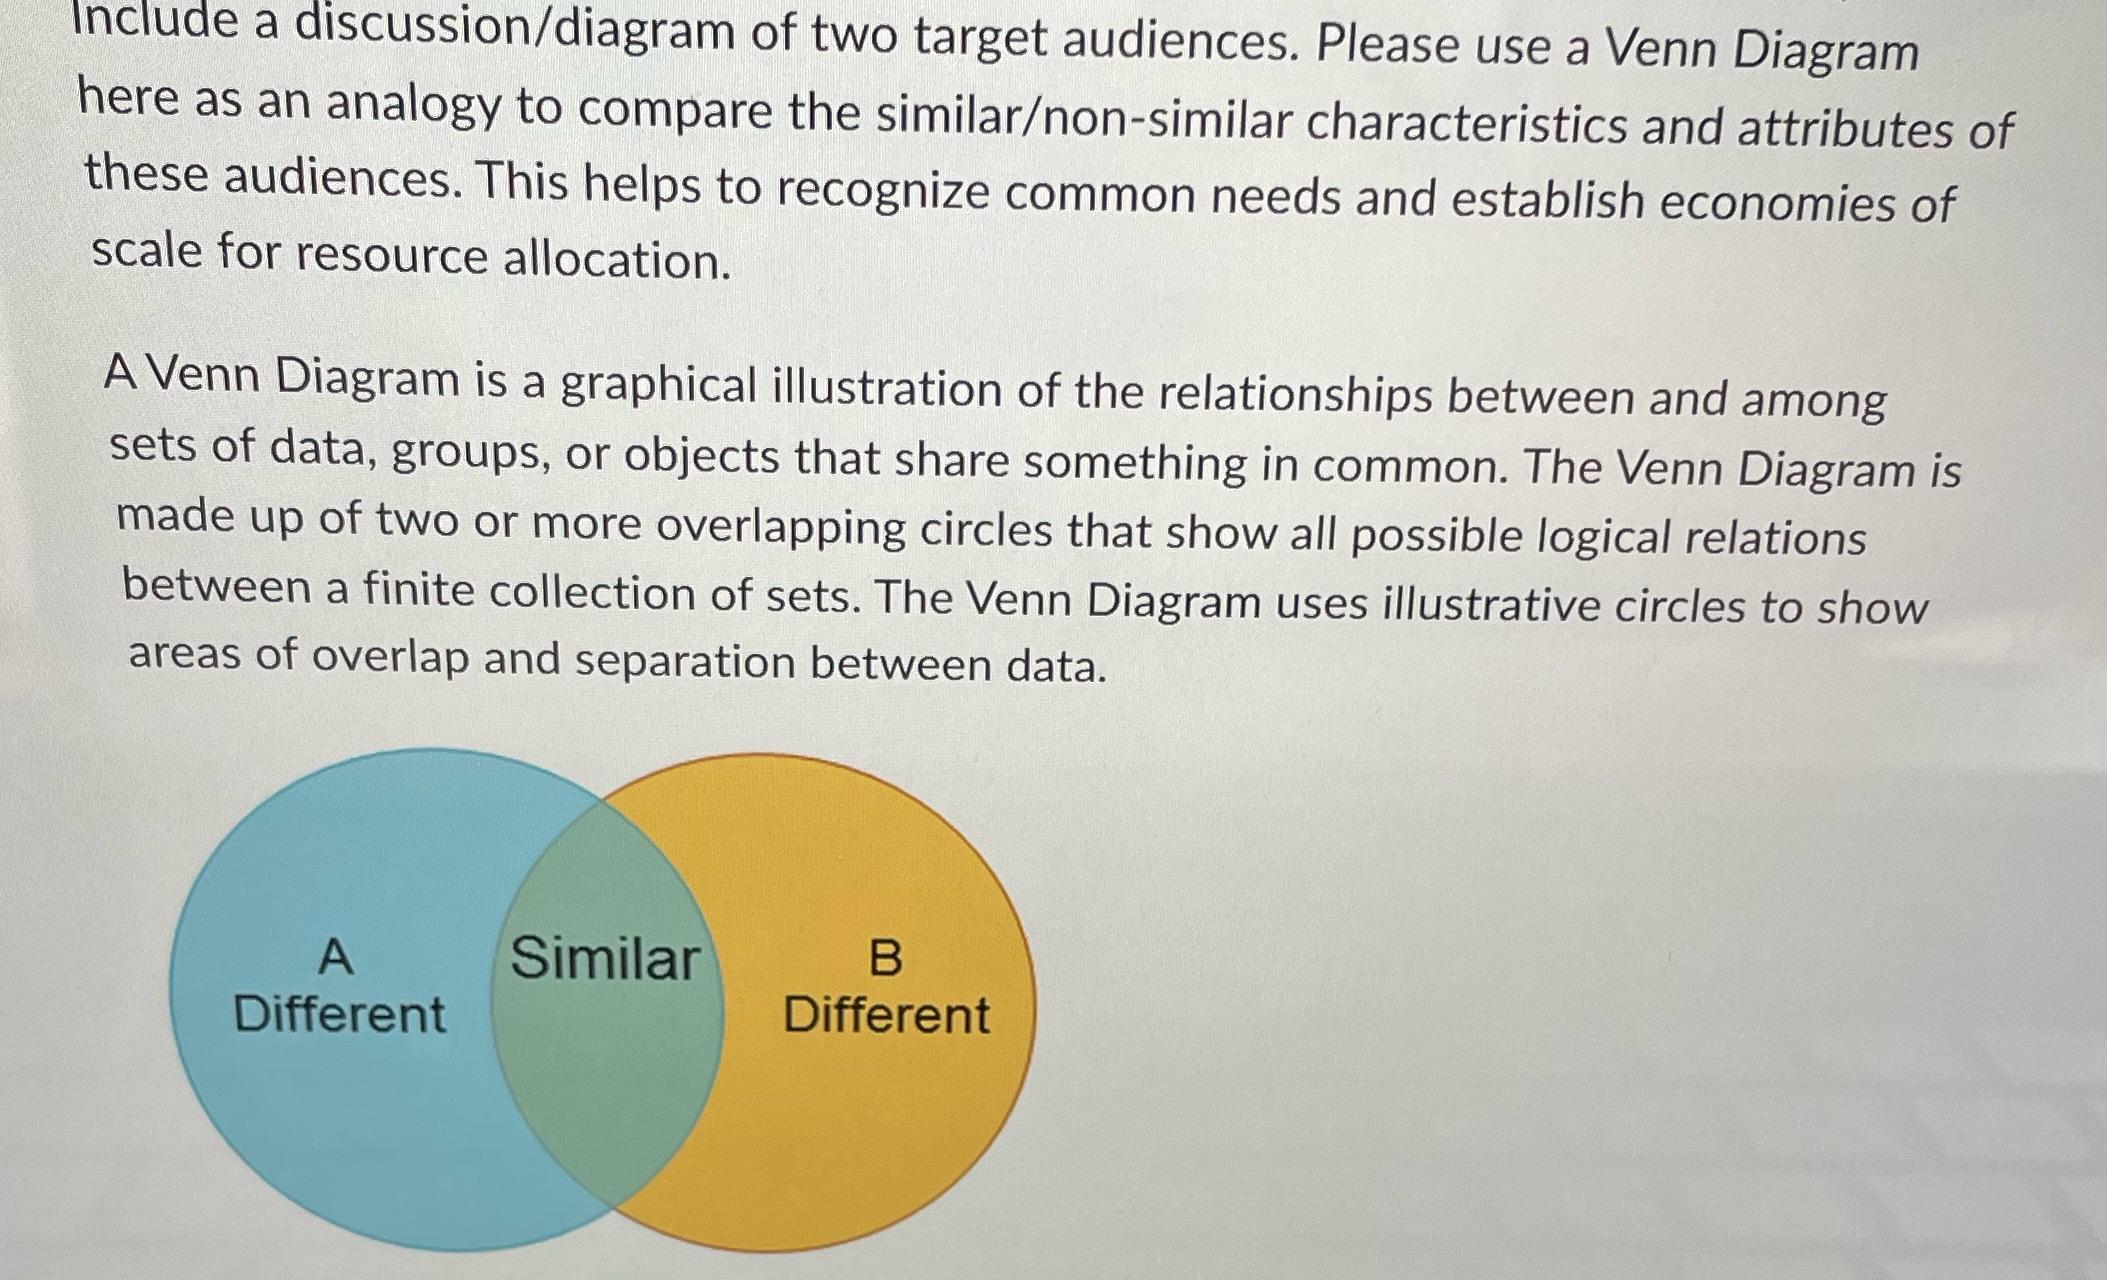 Include a discussion/diagram of two target audiences. Please use a Venn Diagram here as an analogy to compare